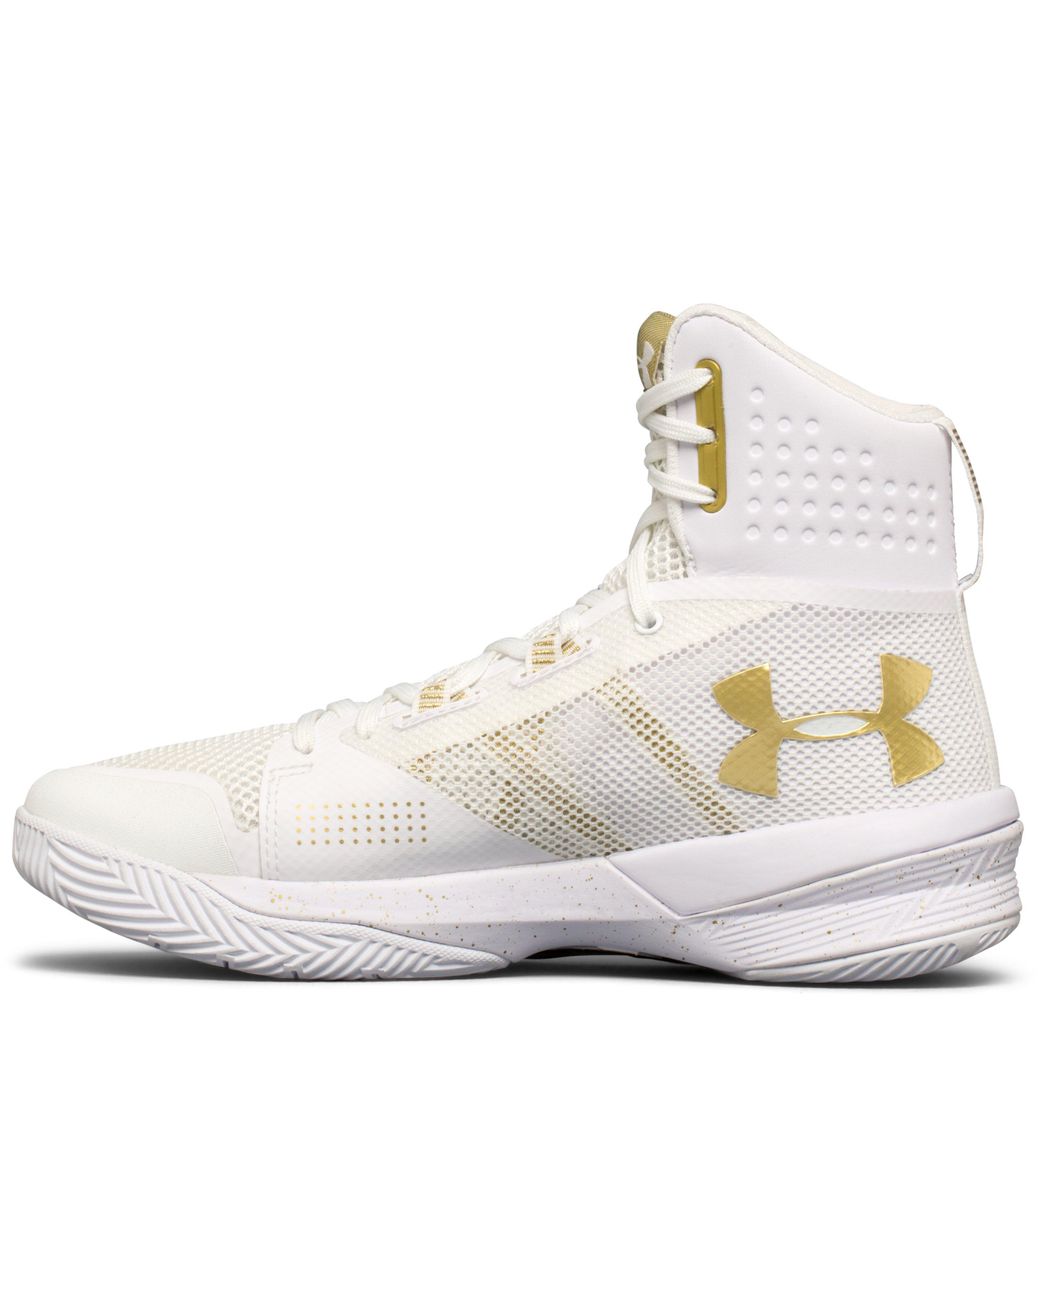 Under Armour Women's Ua Highlight Ace Volleyball Shoes in Metallic | Lyst